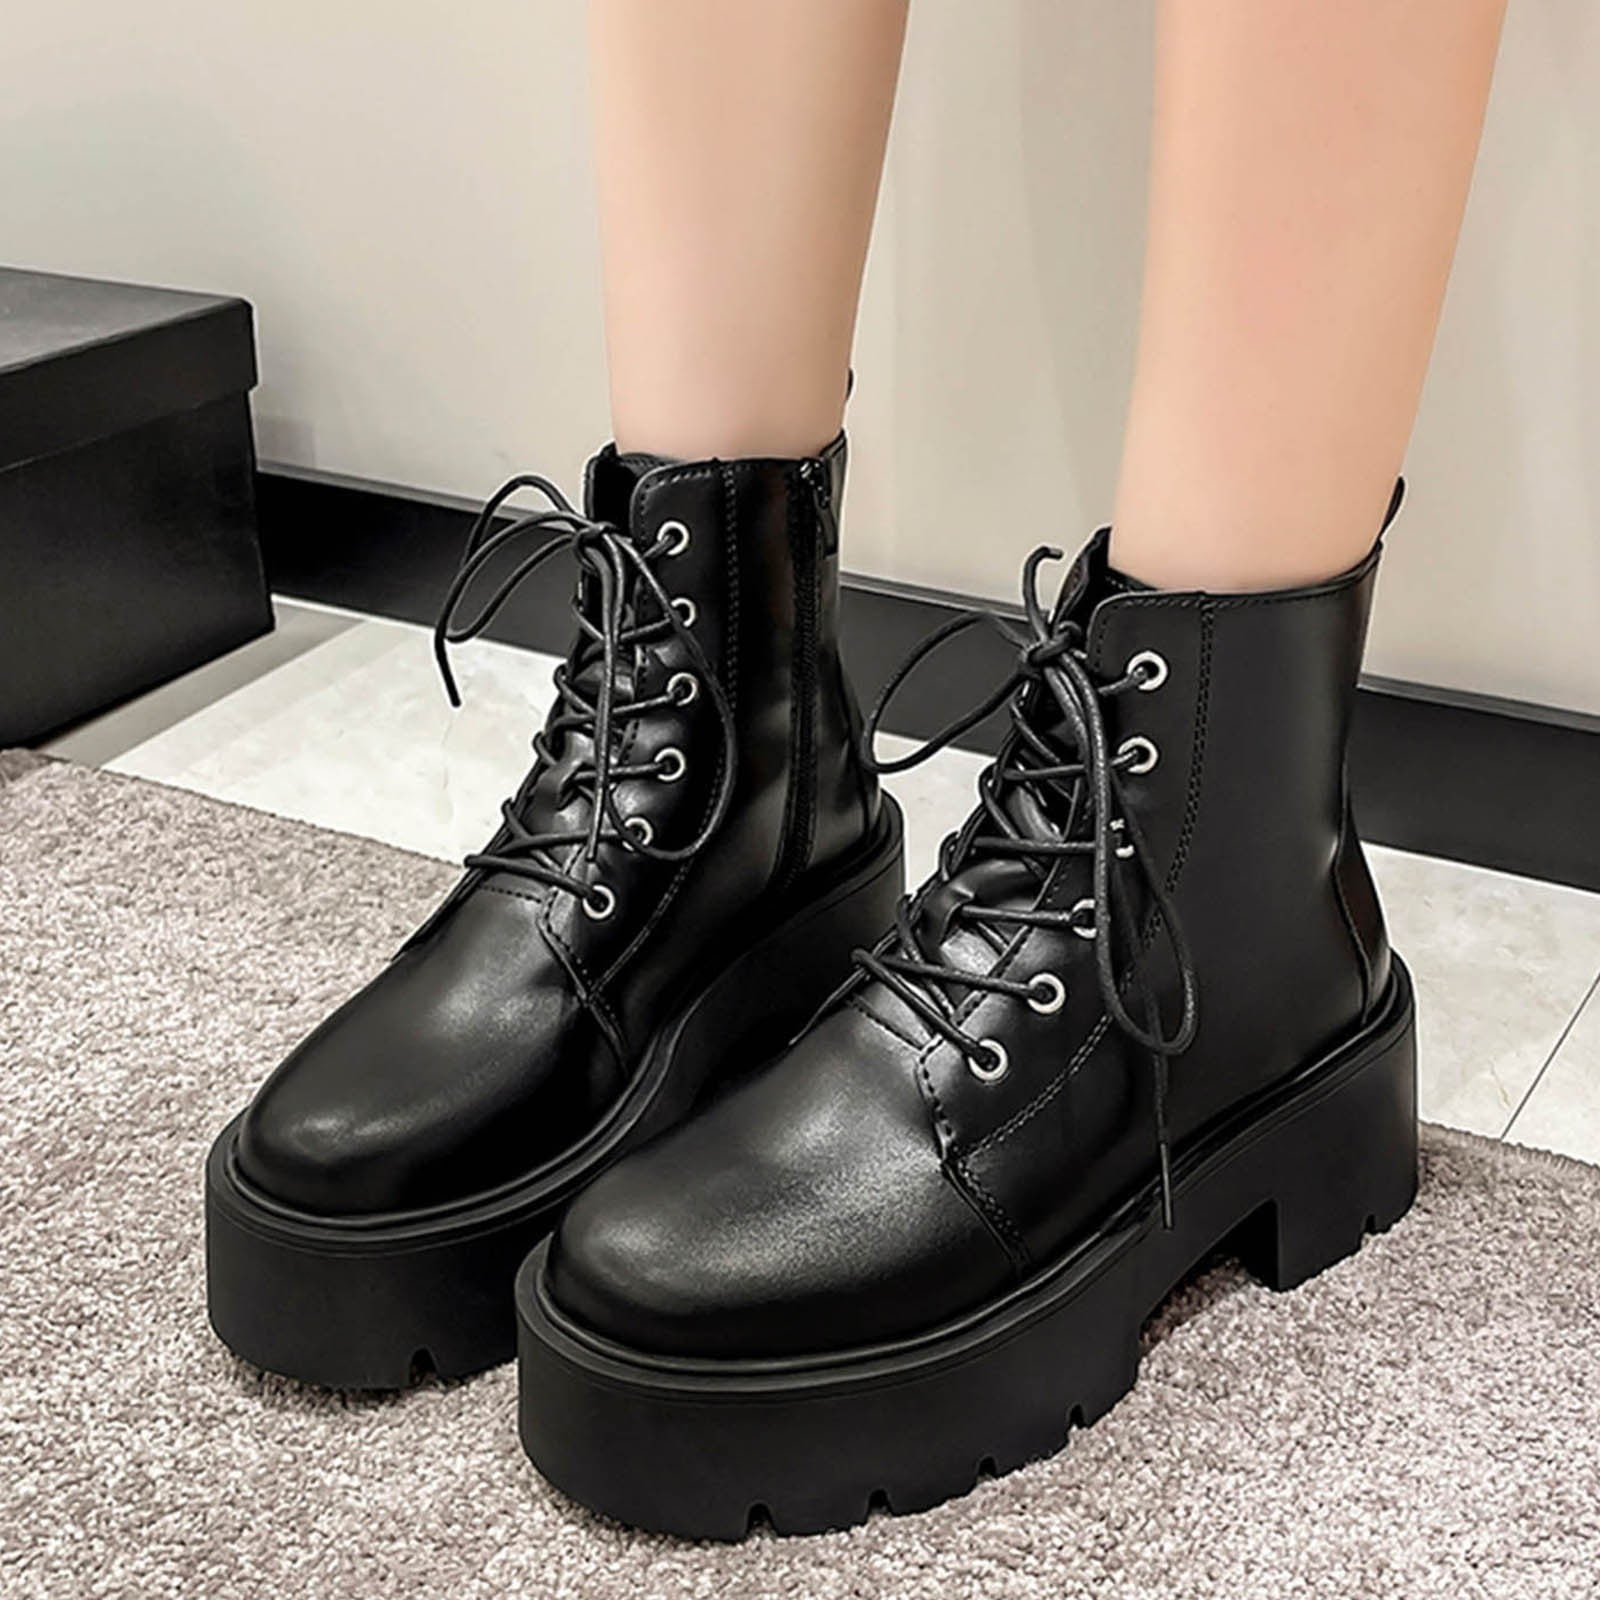 Women's Ankle Boots, Comfortable Ankle Boots